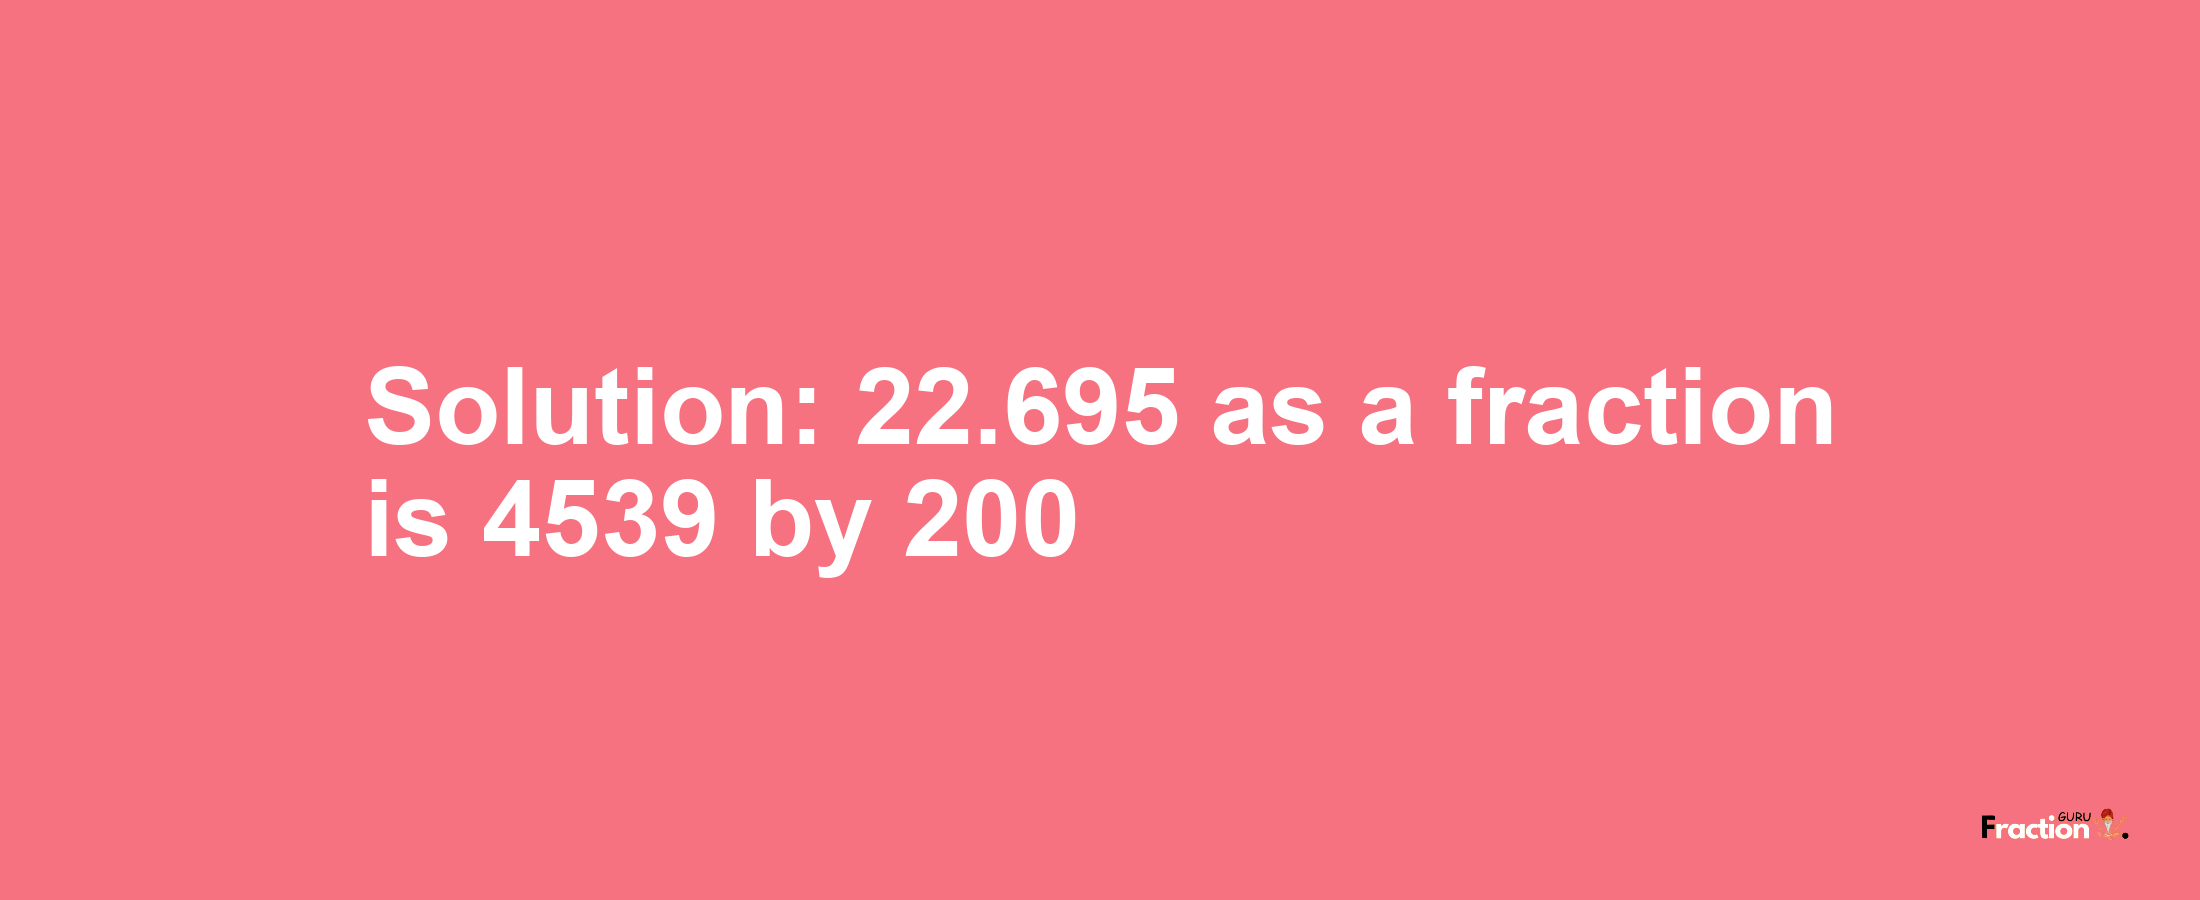 Solution:22.695 as a fraction is 4539/200